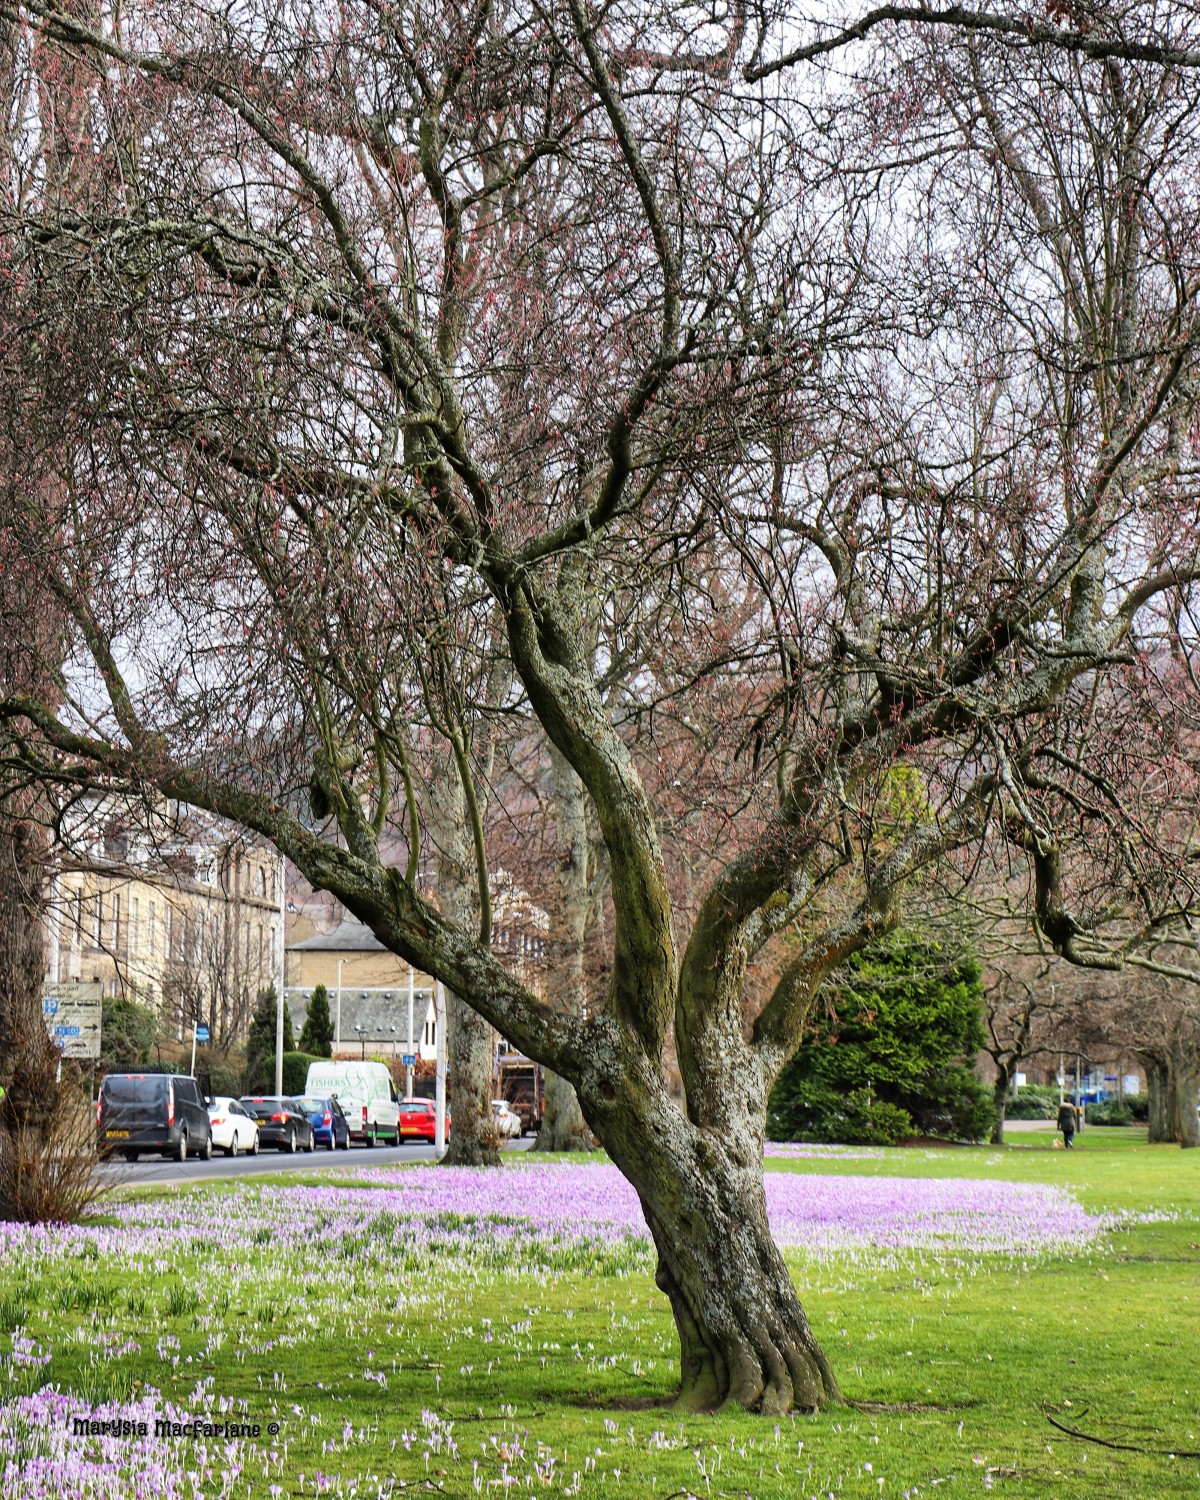 The South Inch looks beautiful in Spring.